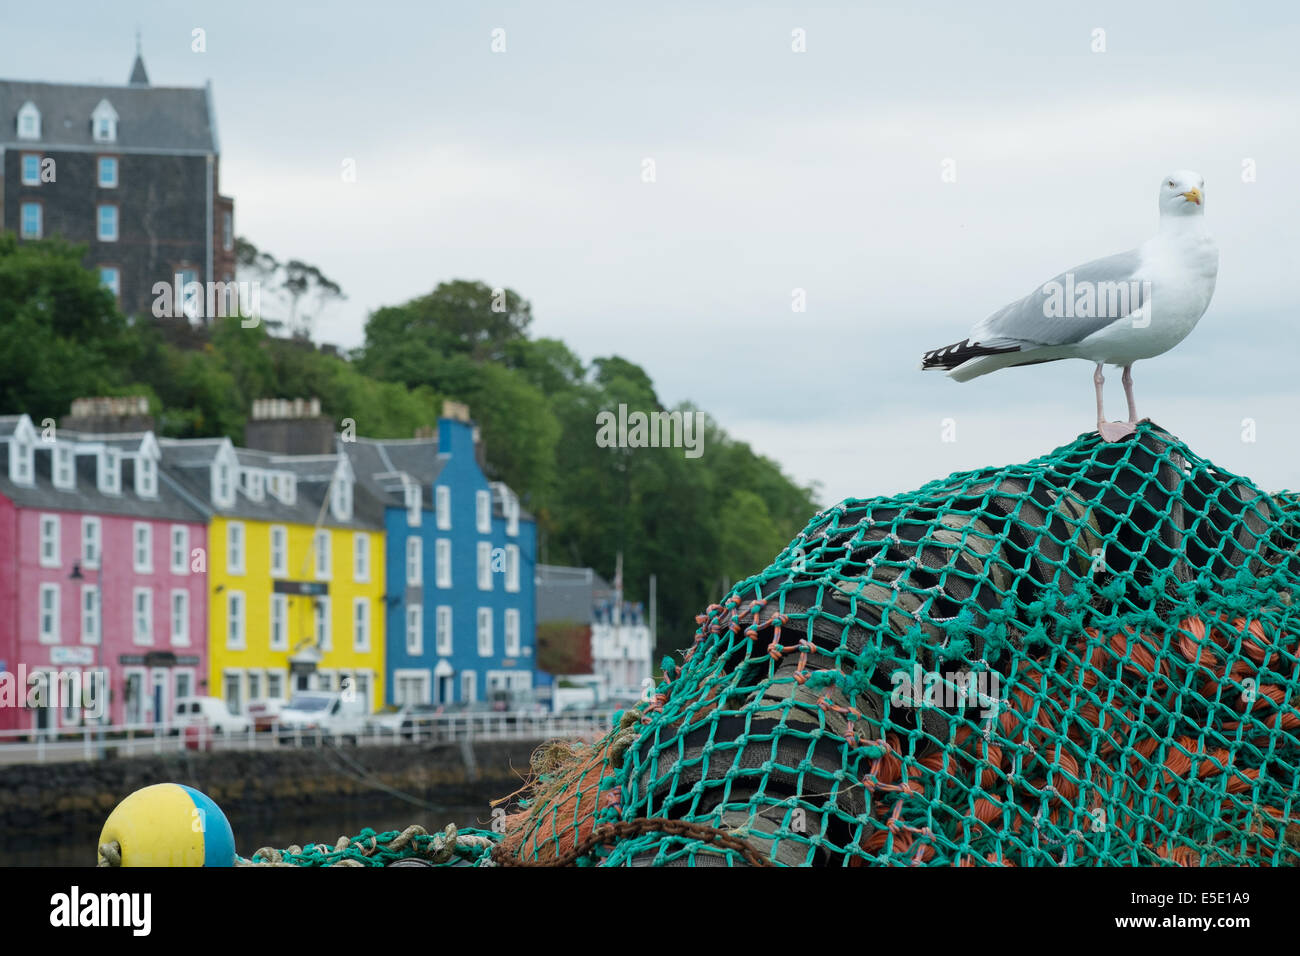 Seagull with fishing nets and brightly coloured houses, Tobermory, isle of Mull, Scottish Islands Stock Photo